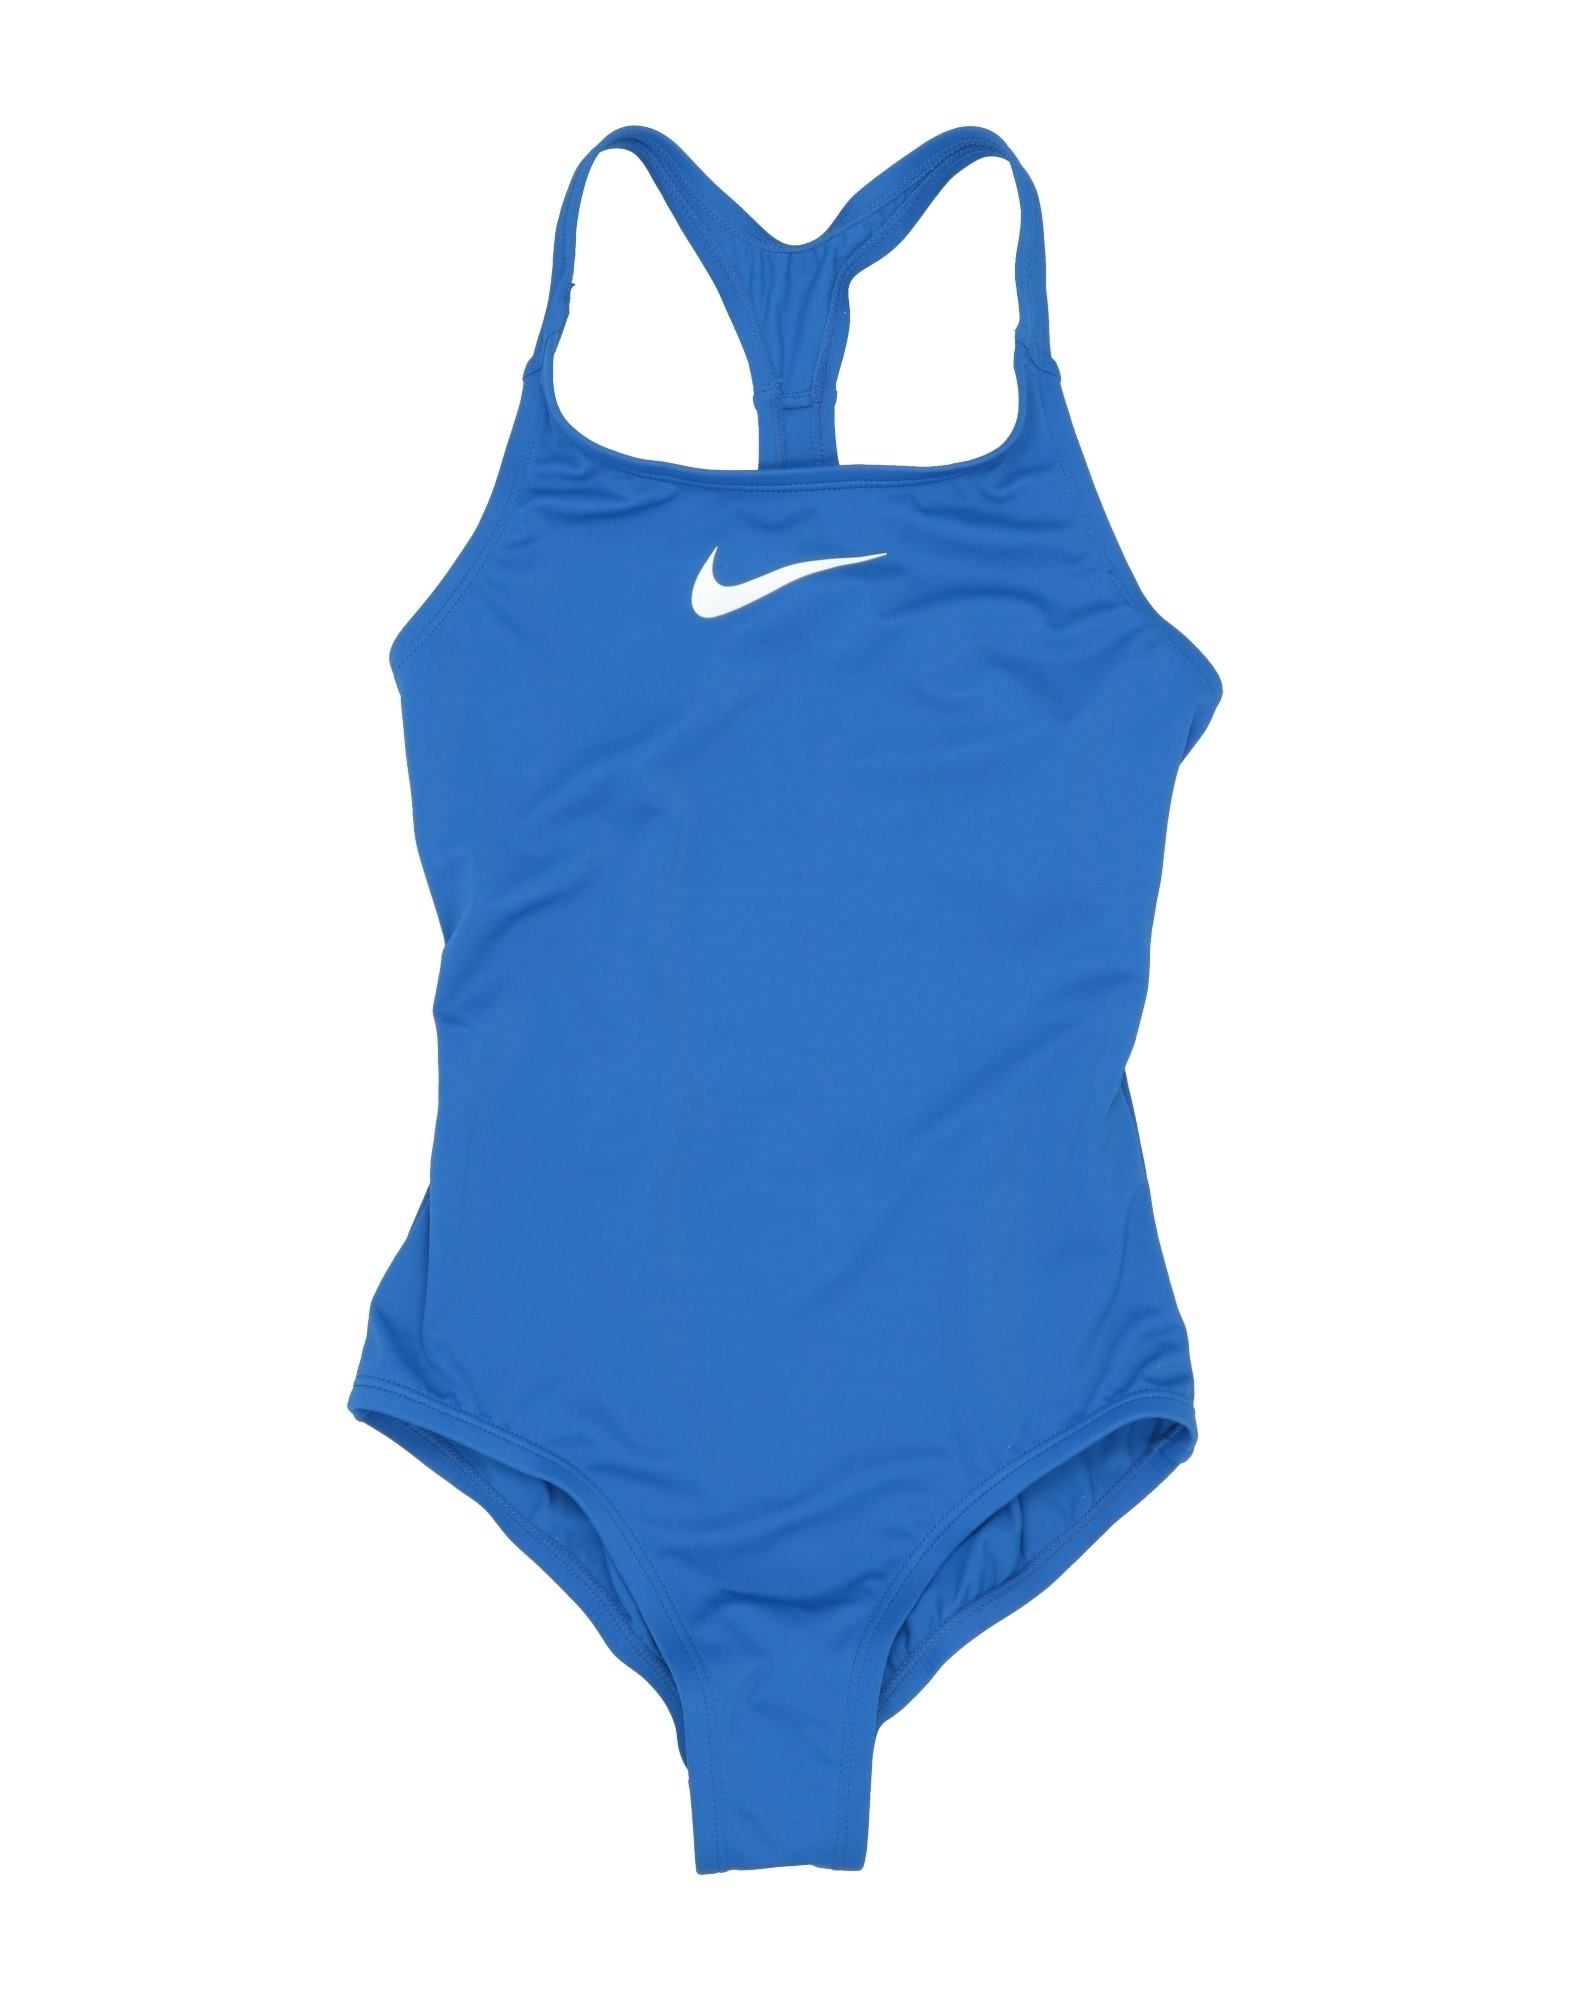 Nike Kids' One-piece Swimsuits In Bright Blue | ModeSens